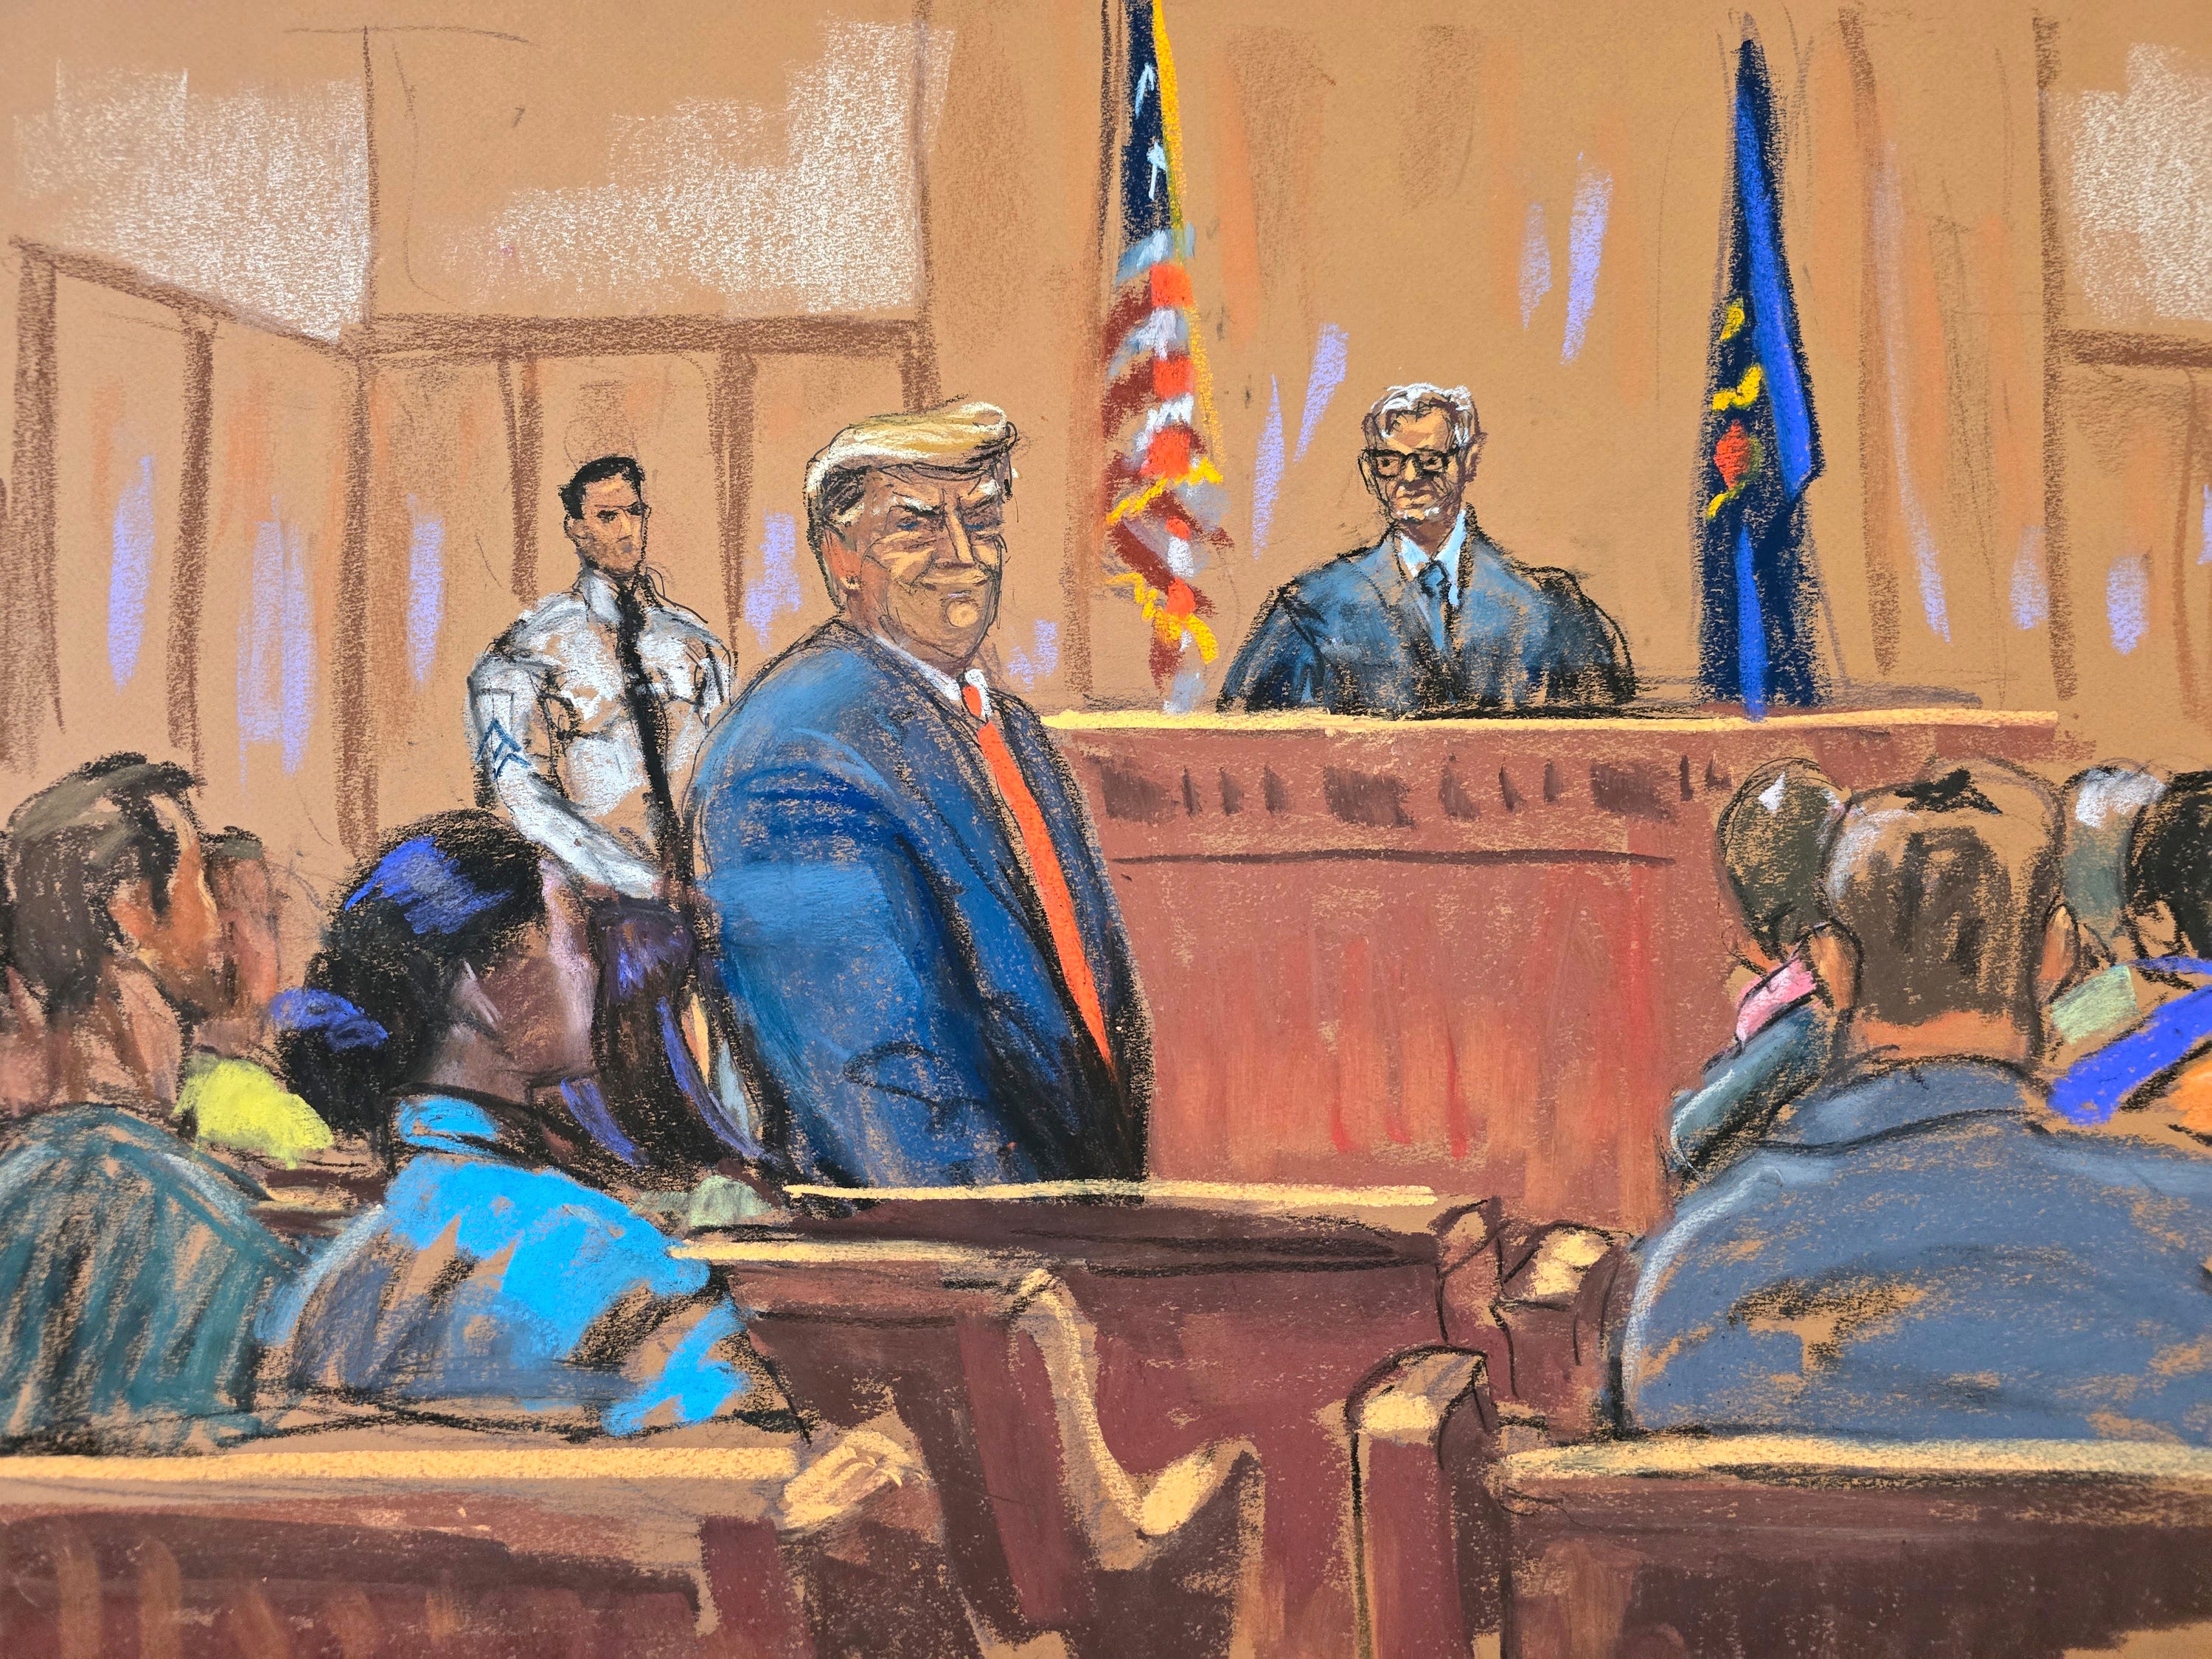 microsoft, trump trial sketch artists catch the former president's many courtroom moods: sleepy, grumpy, and — less often — happy